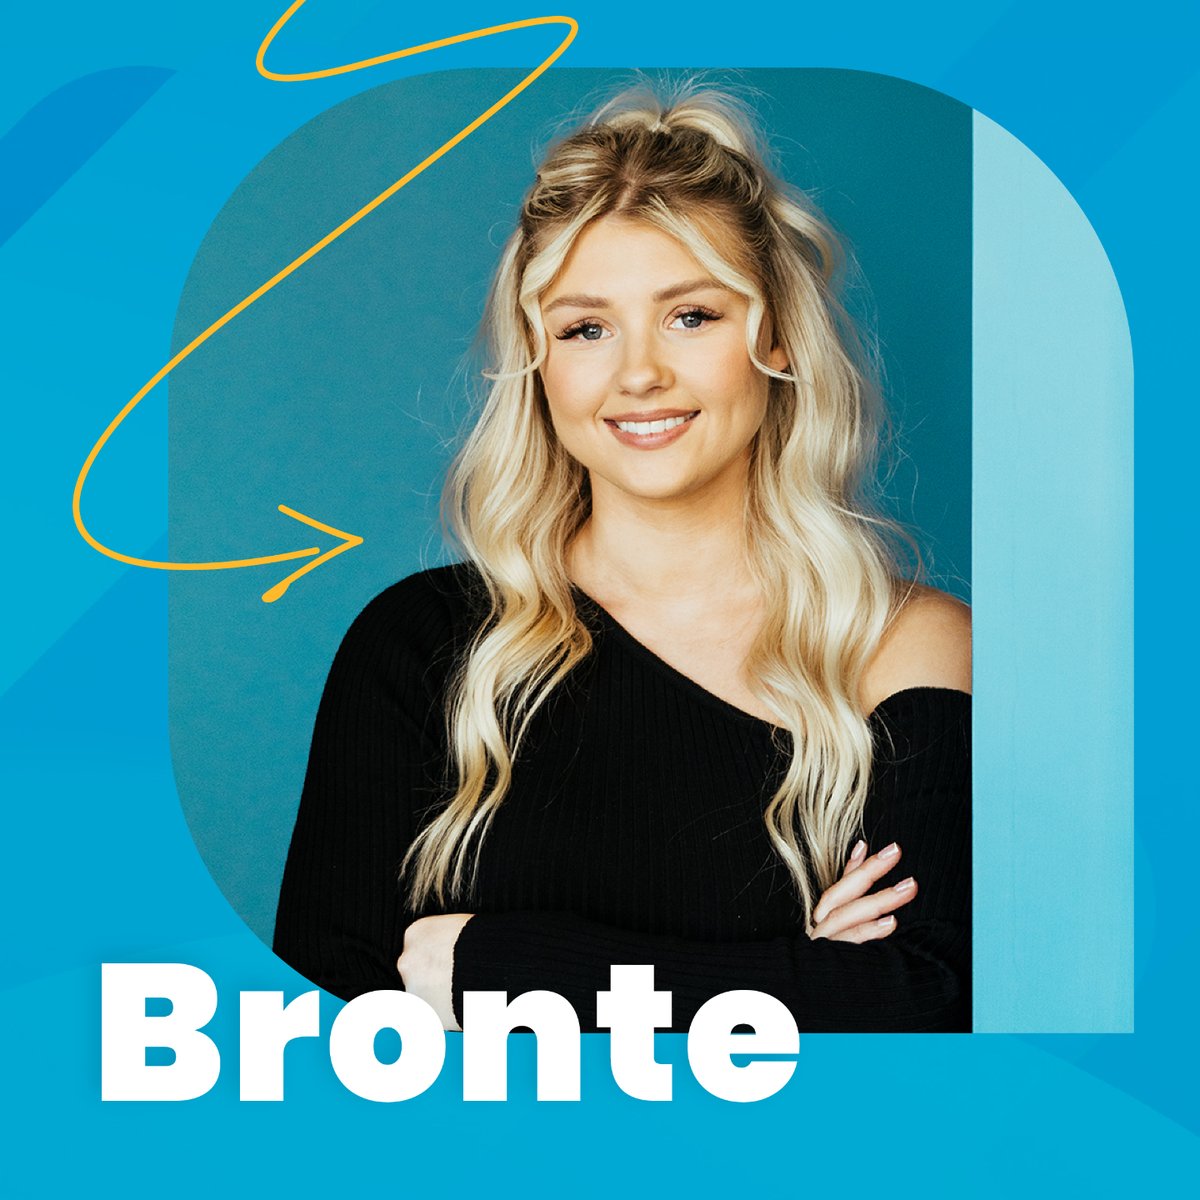 🔈Shoutout to Bronte! Bronte joined us last year and quickly became an integral member of the team ✨ Not only is she an all round superstar, she deservedly won the adaptability category in our End of Year Awards 🏆 #MeetTheTeam #Spotlight #FlexSquad